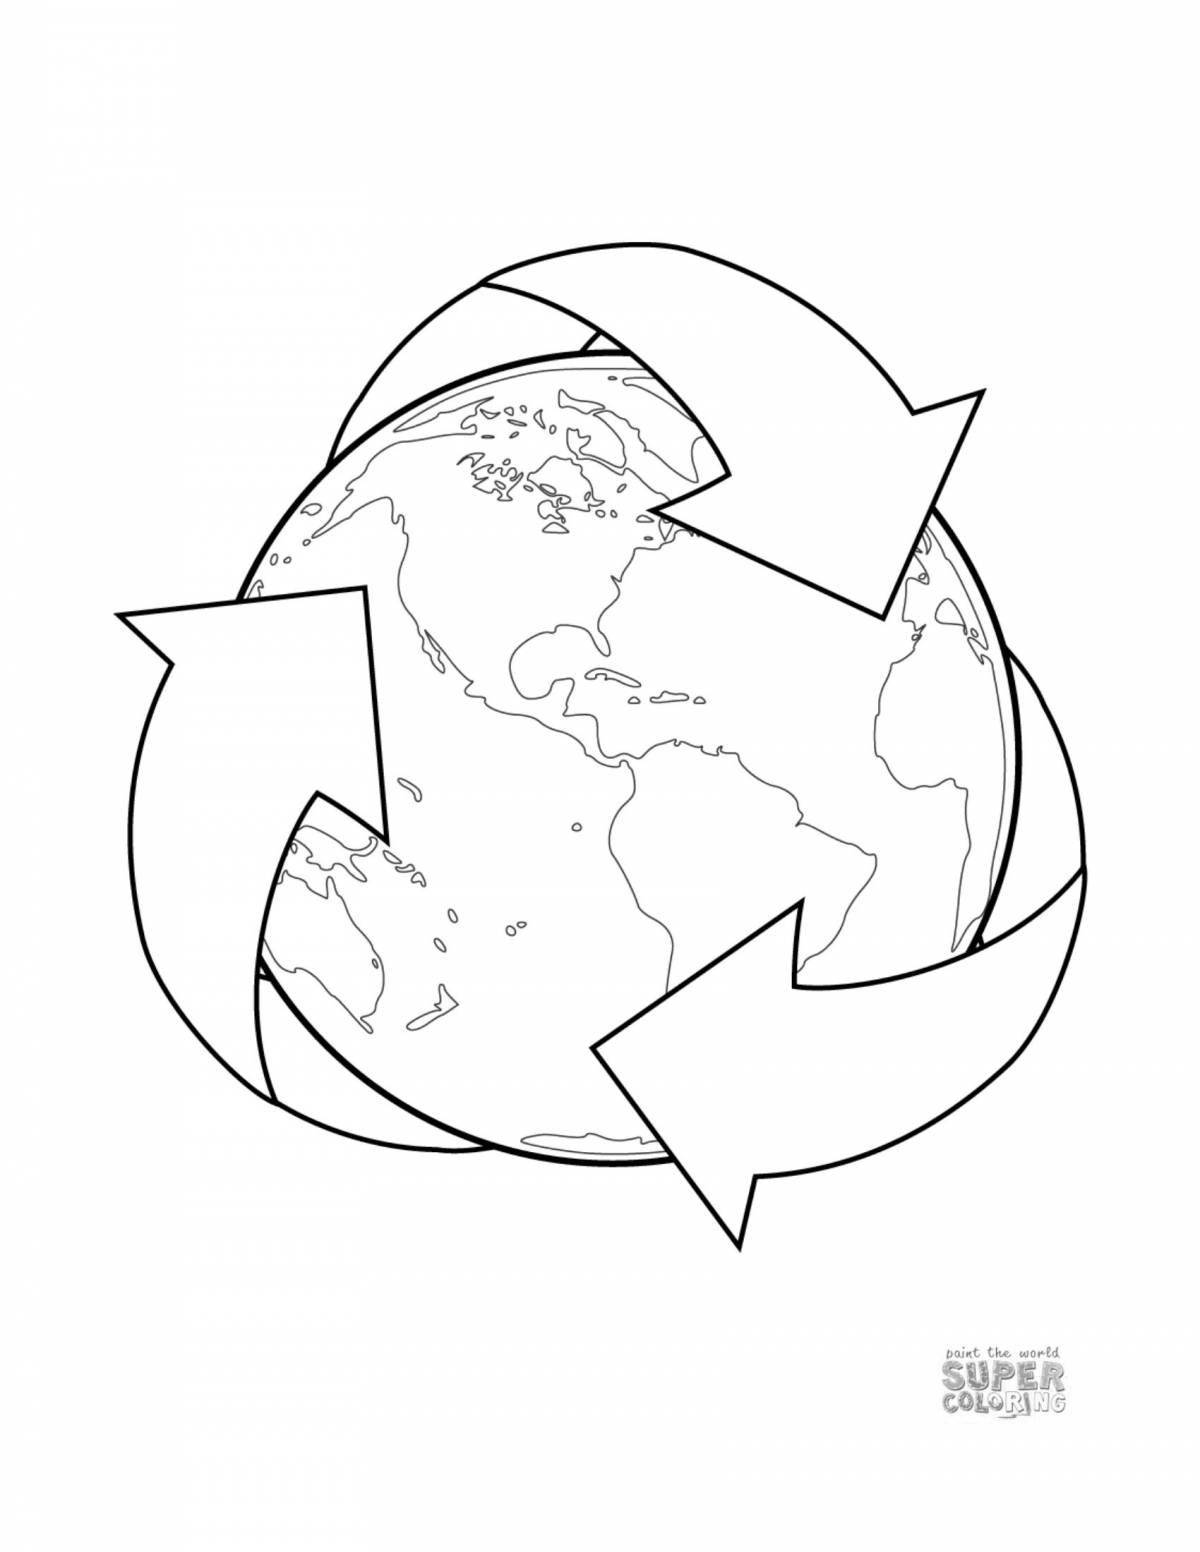 Playful environmental poster coloring page